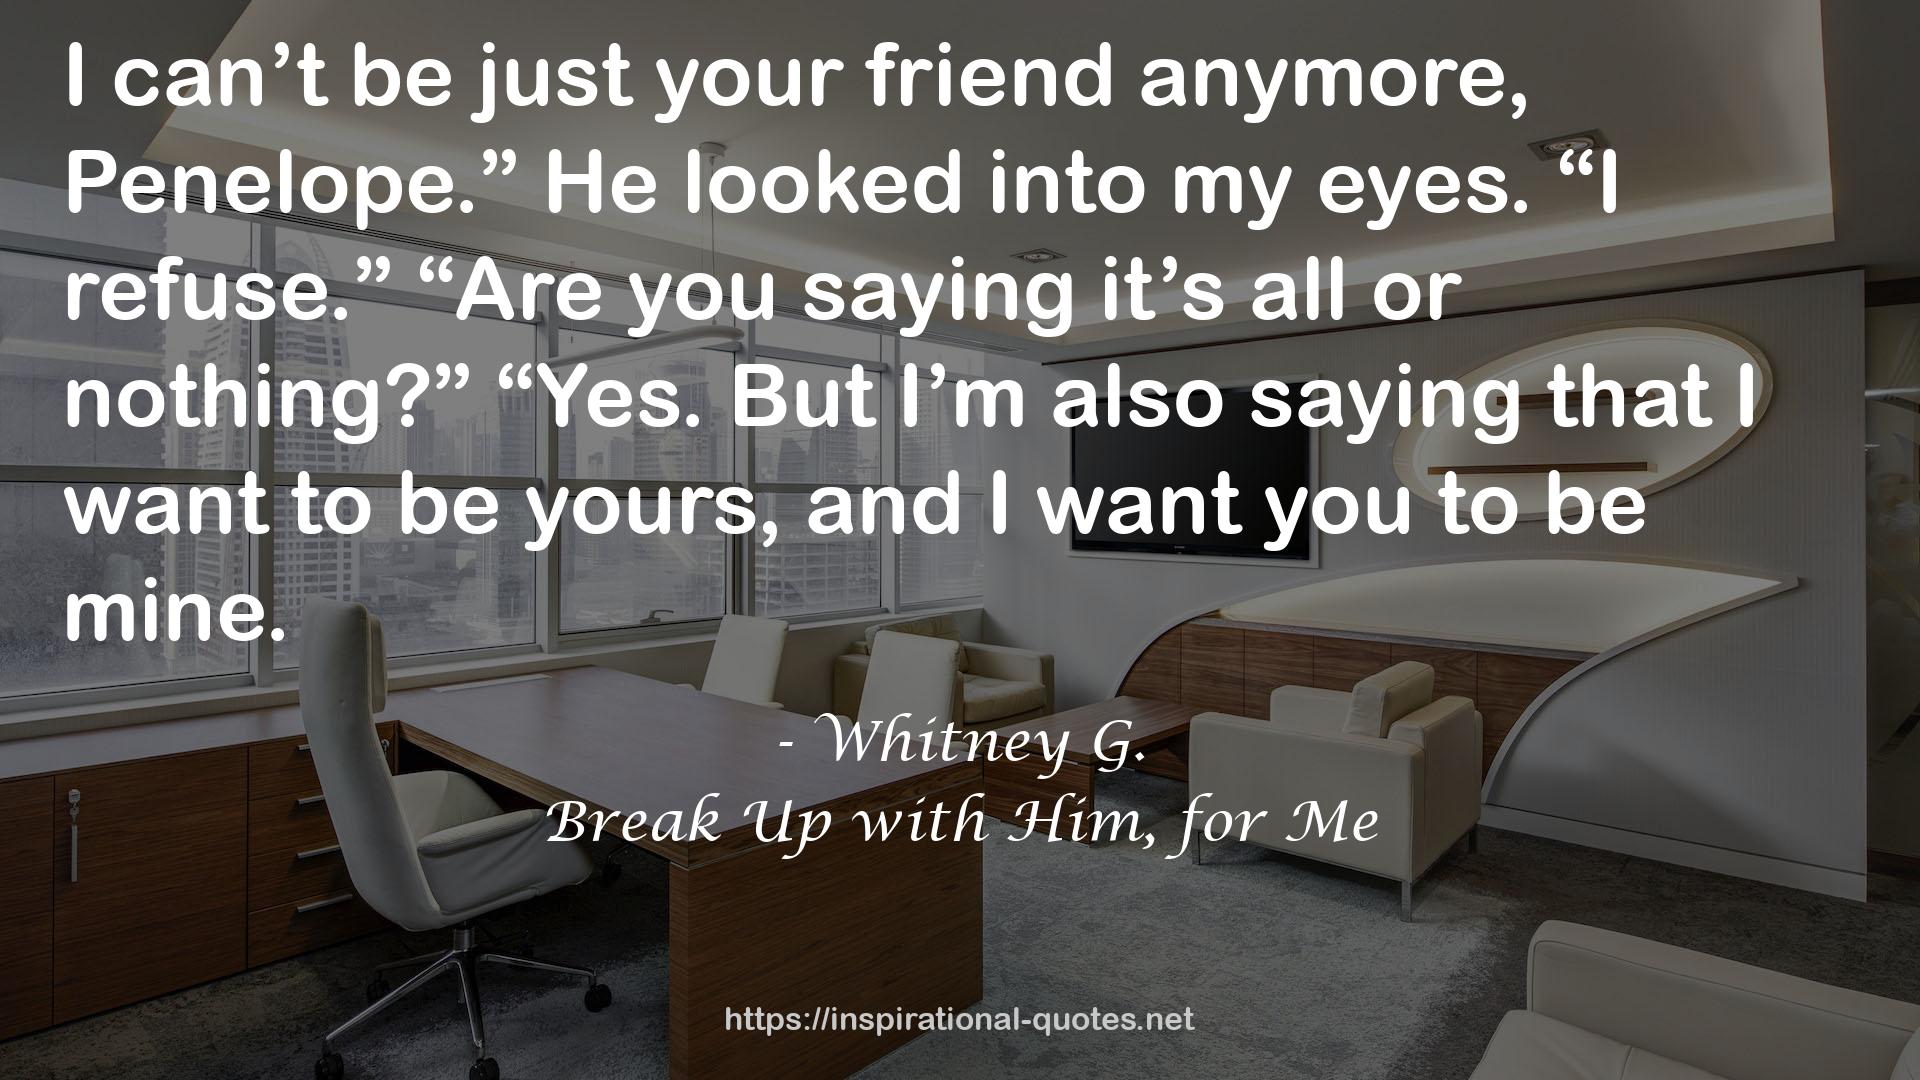 Break Up with Him, for Me QUOTES